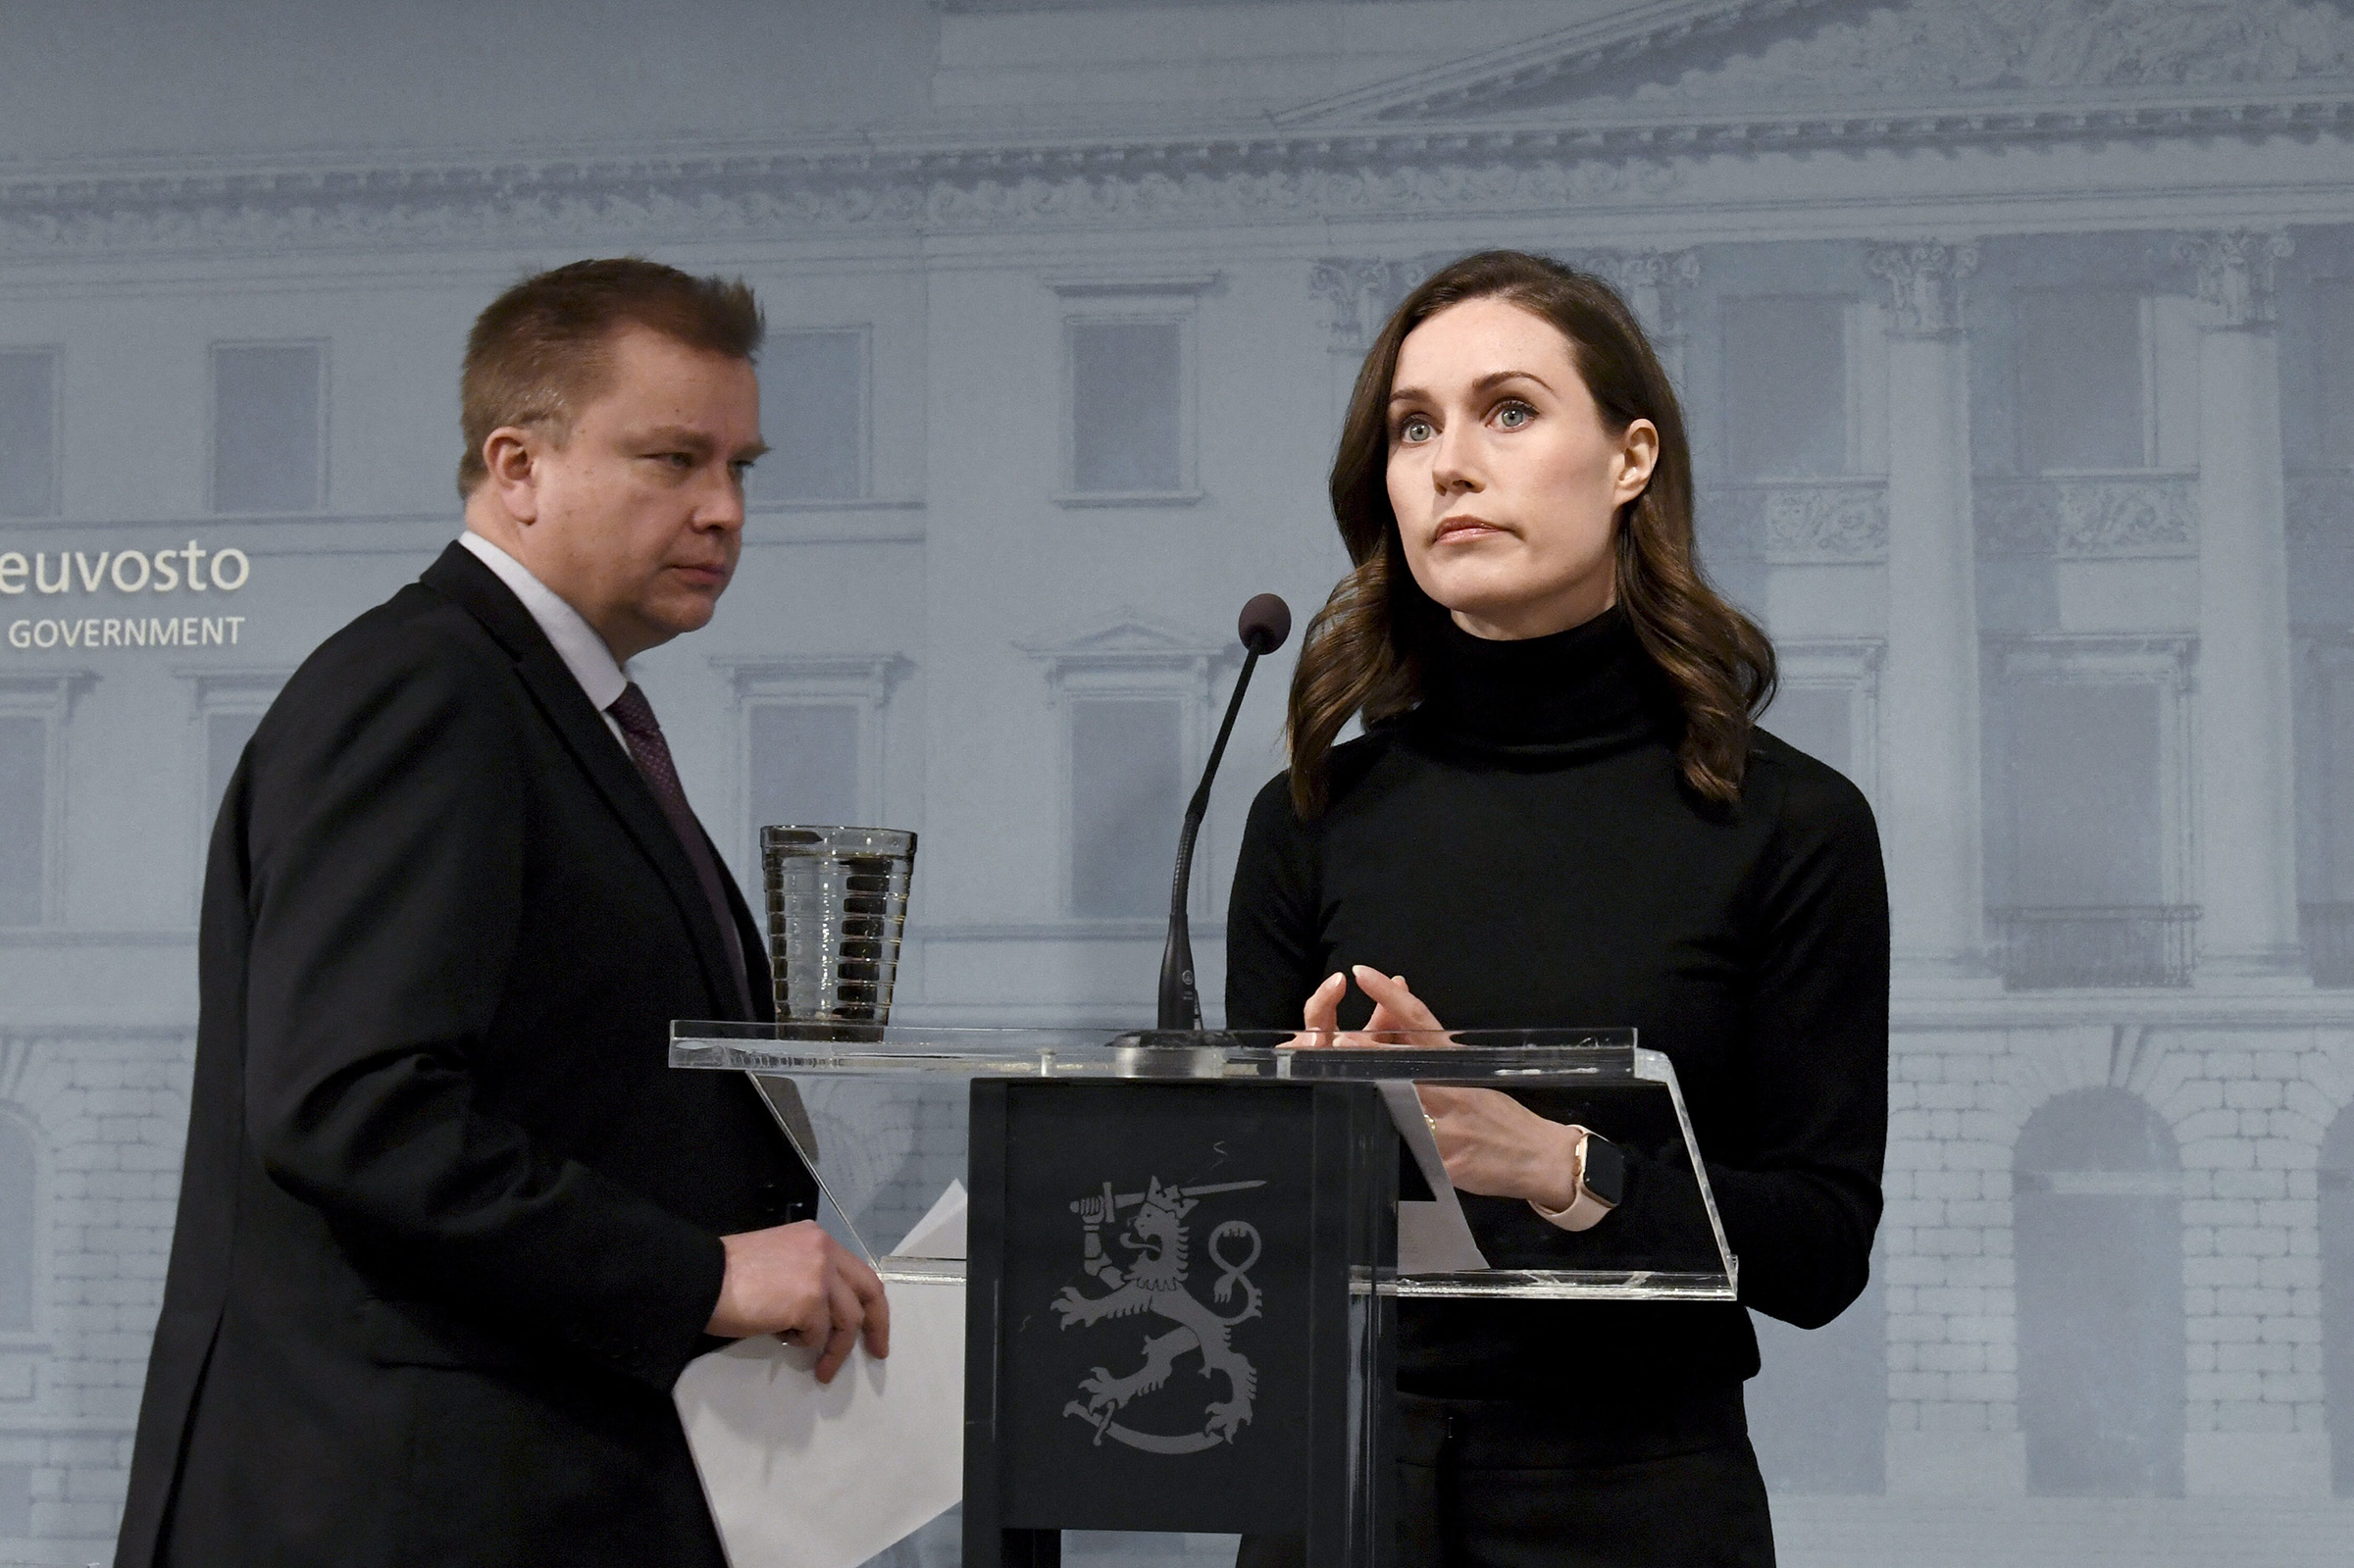 Finland's Prime Minister Sanna Marin, right, and Defense Minister Antti Kaikkonen arrive to address a press conference after the decision to supply arms to Ukraine, in Helsinki, Finland, on Feb. 28, 2022.